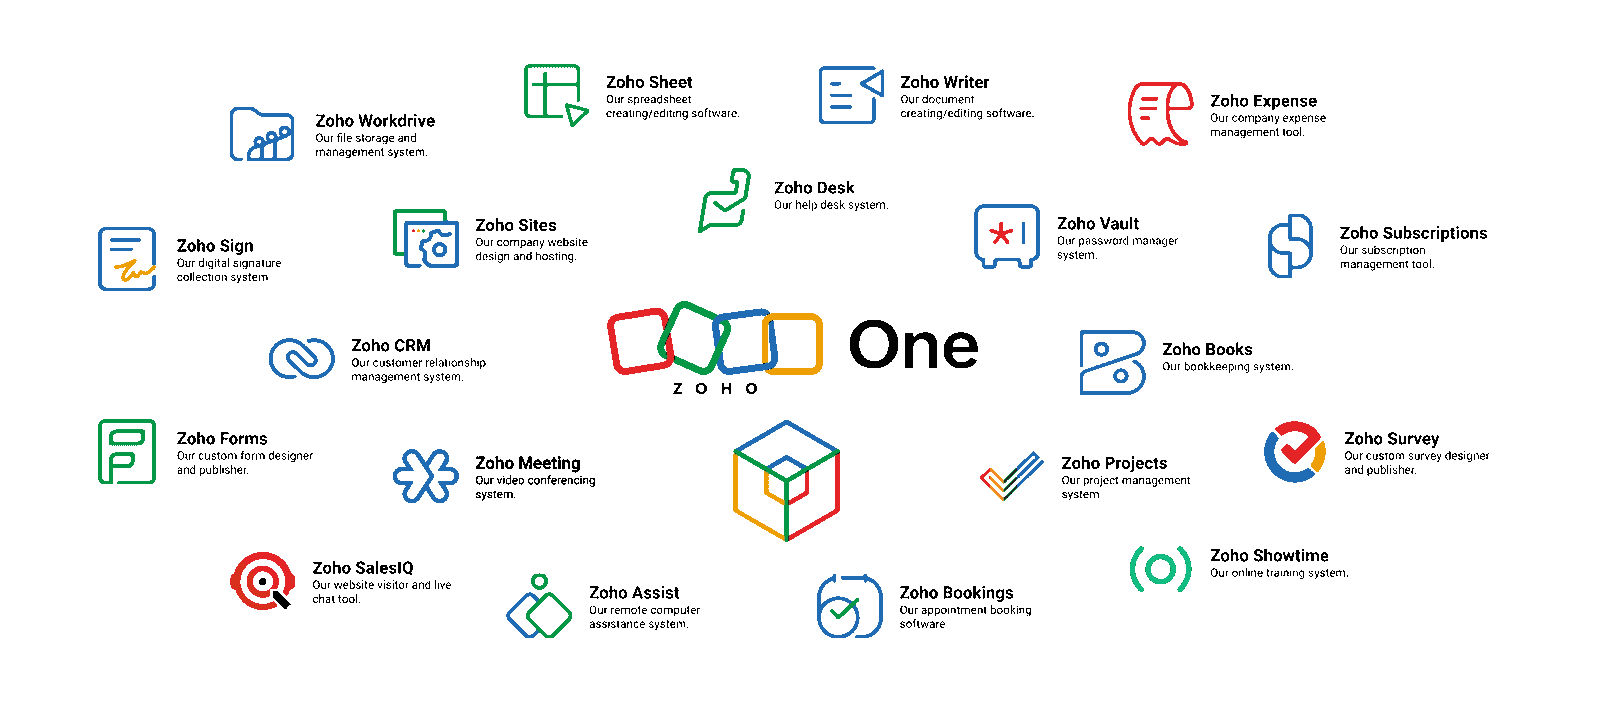 Zoho One - One Unified Platform To Run Your Entire Business